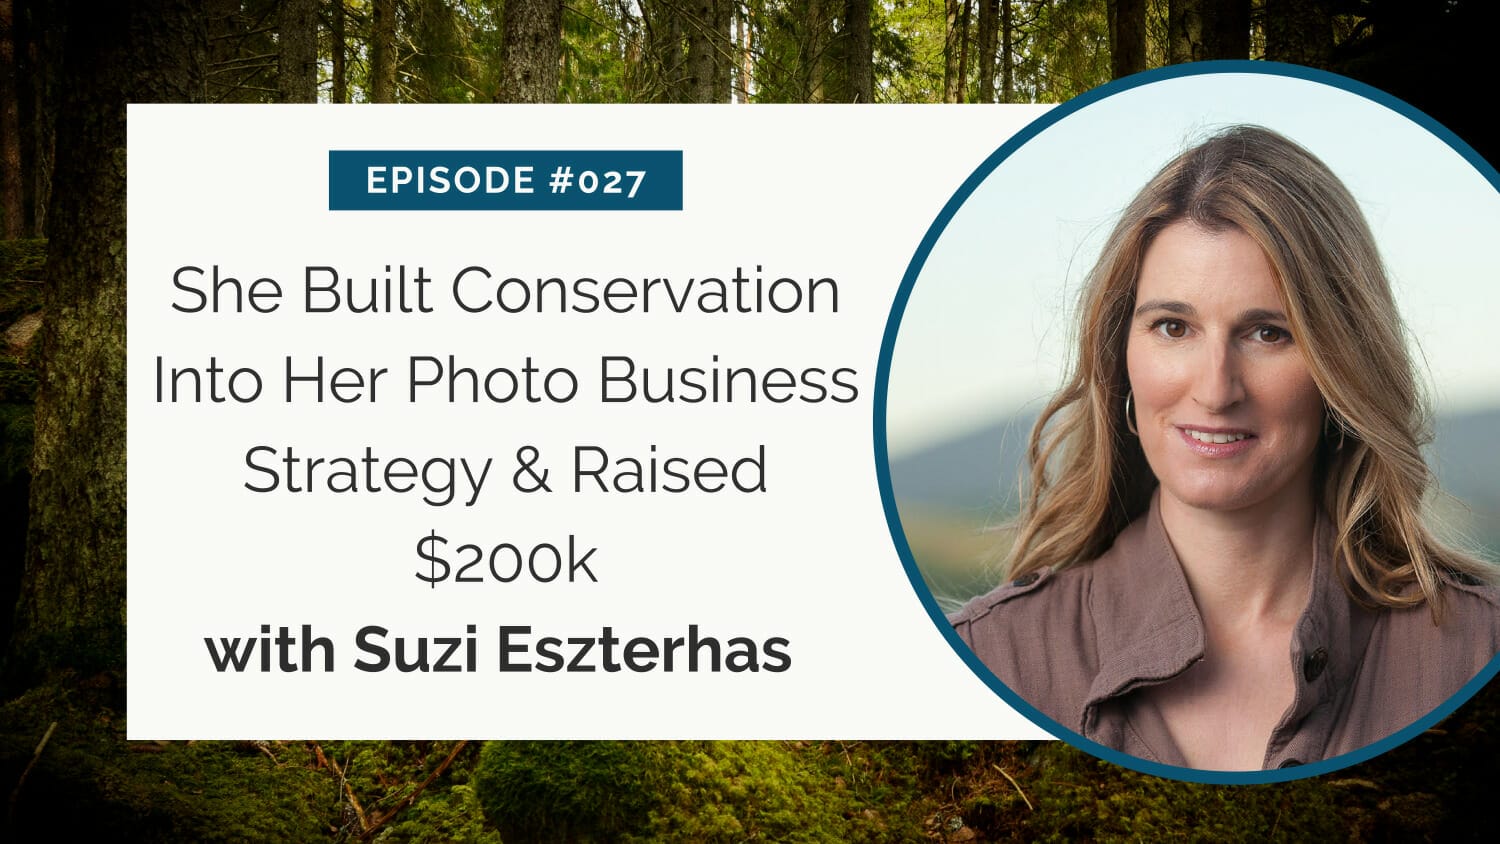 Promotional graphic for a podcast episode featuring suzi eszterhas discussing how she incorporated conservation into her photography business and raised $200k.